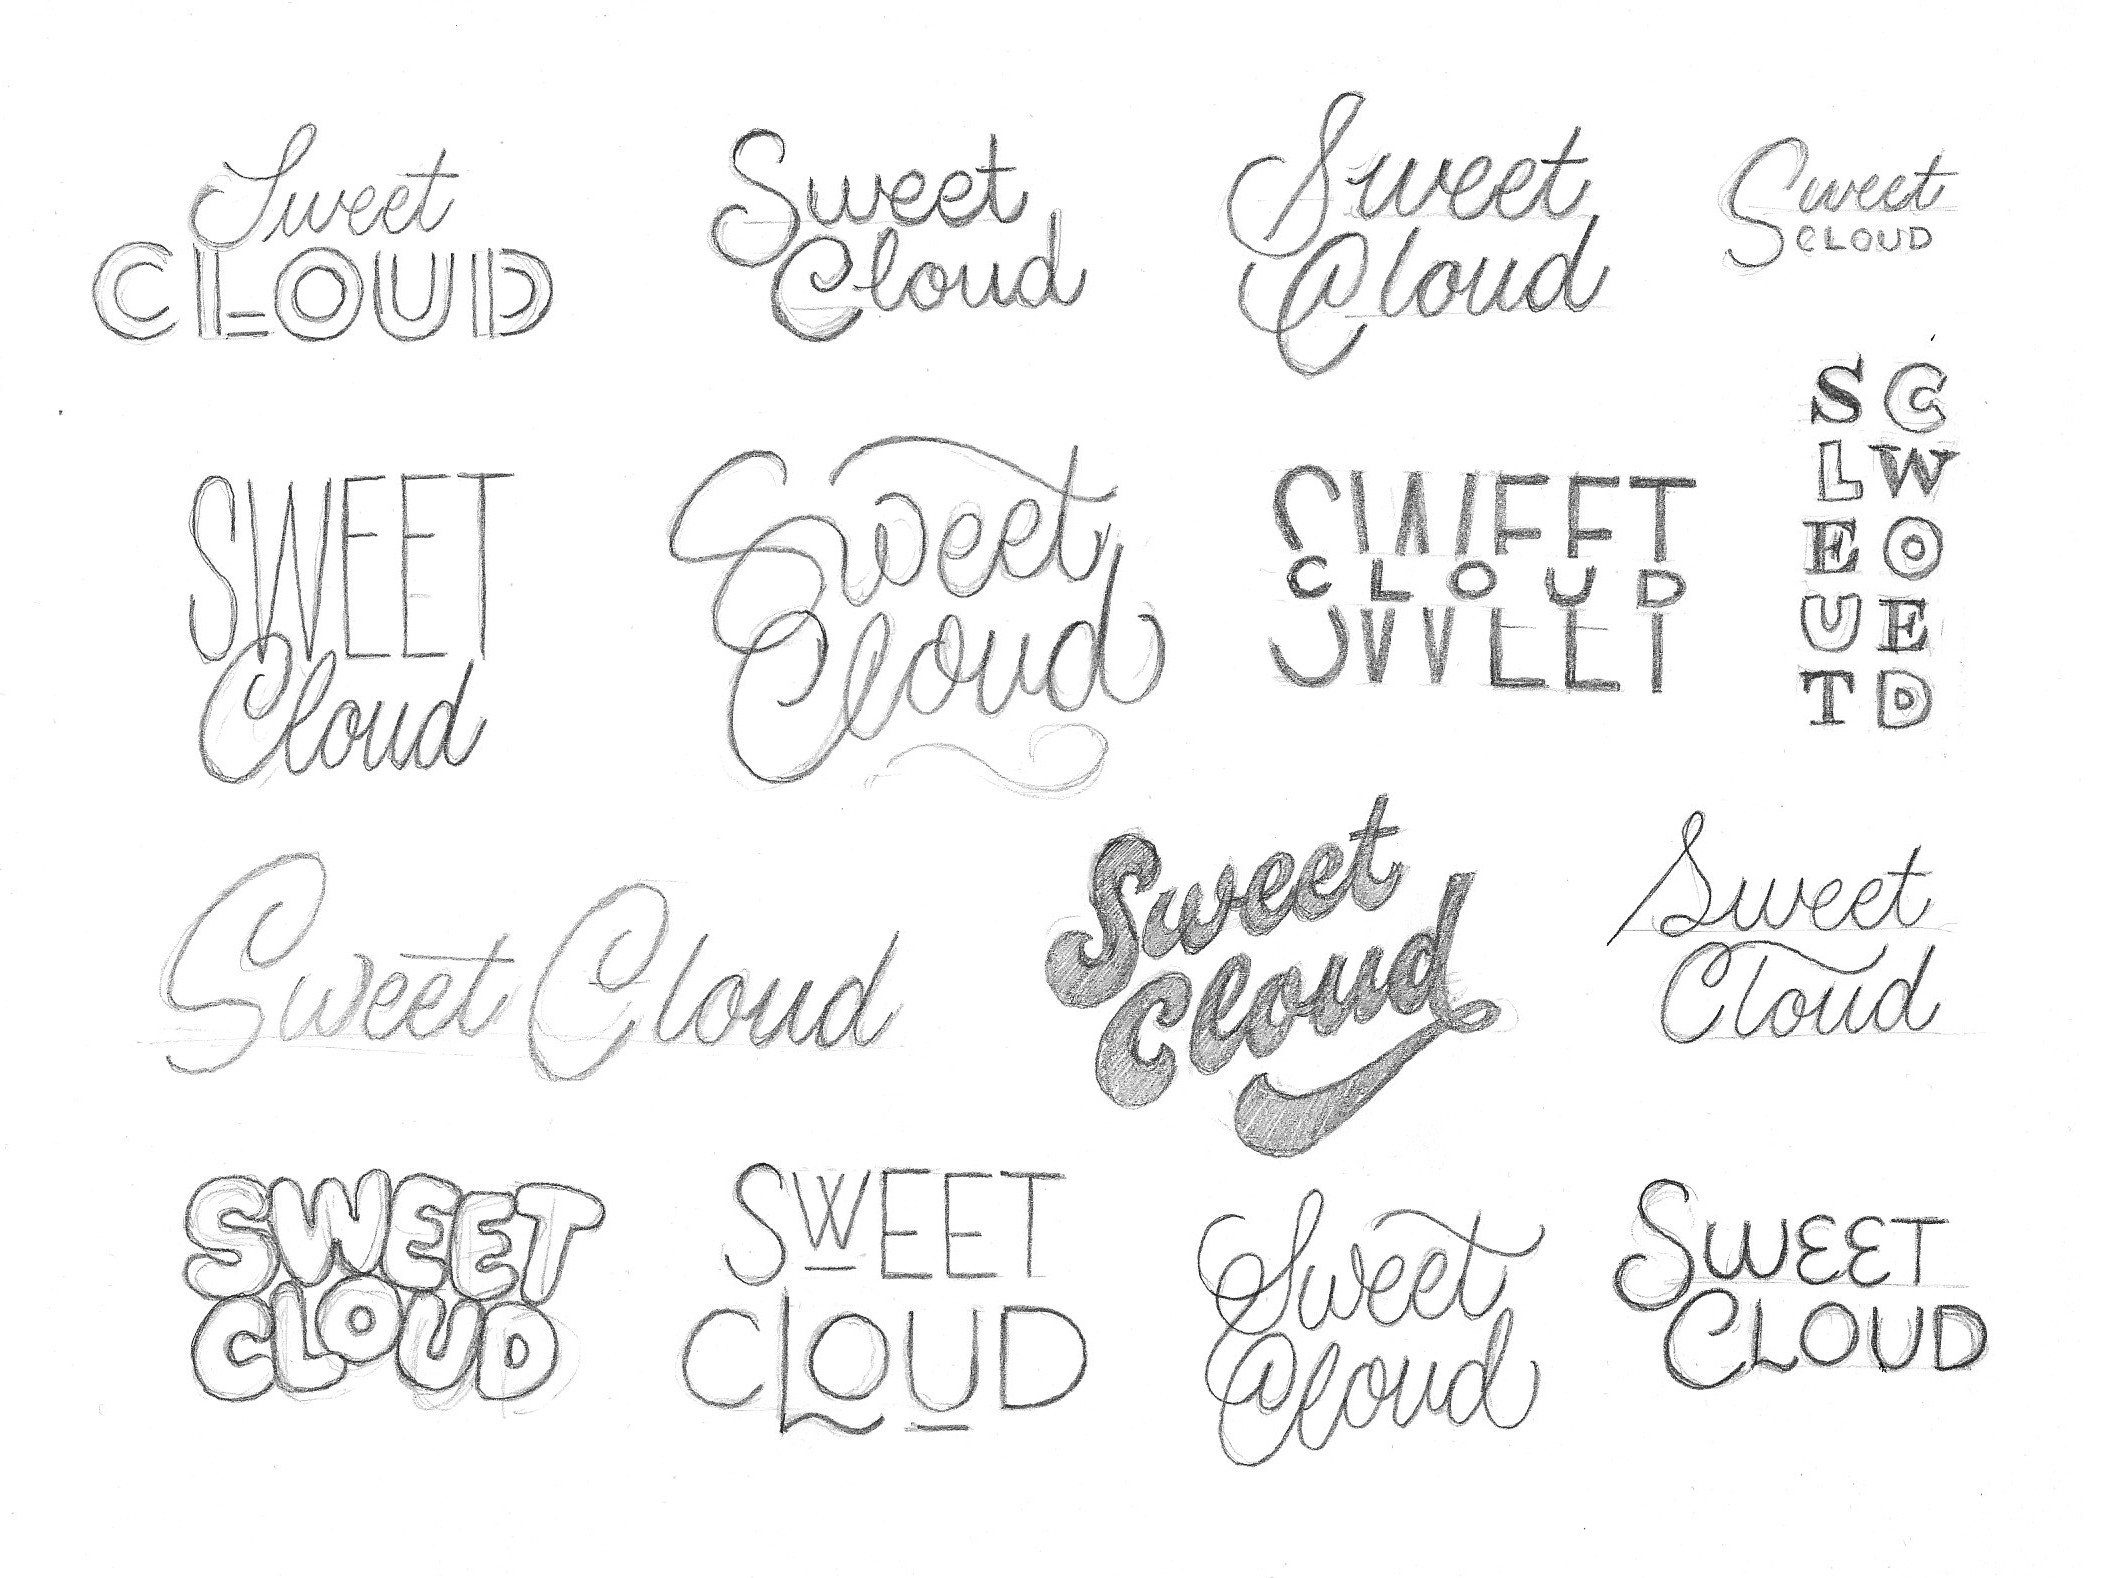 Sweet Cloud Ice Cream Sketches by Mike Burroughs on Dribbble